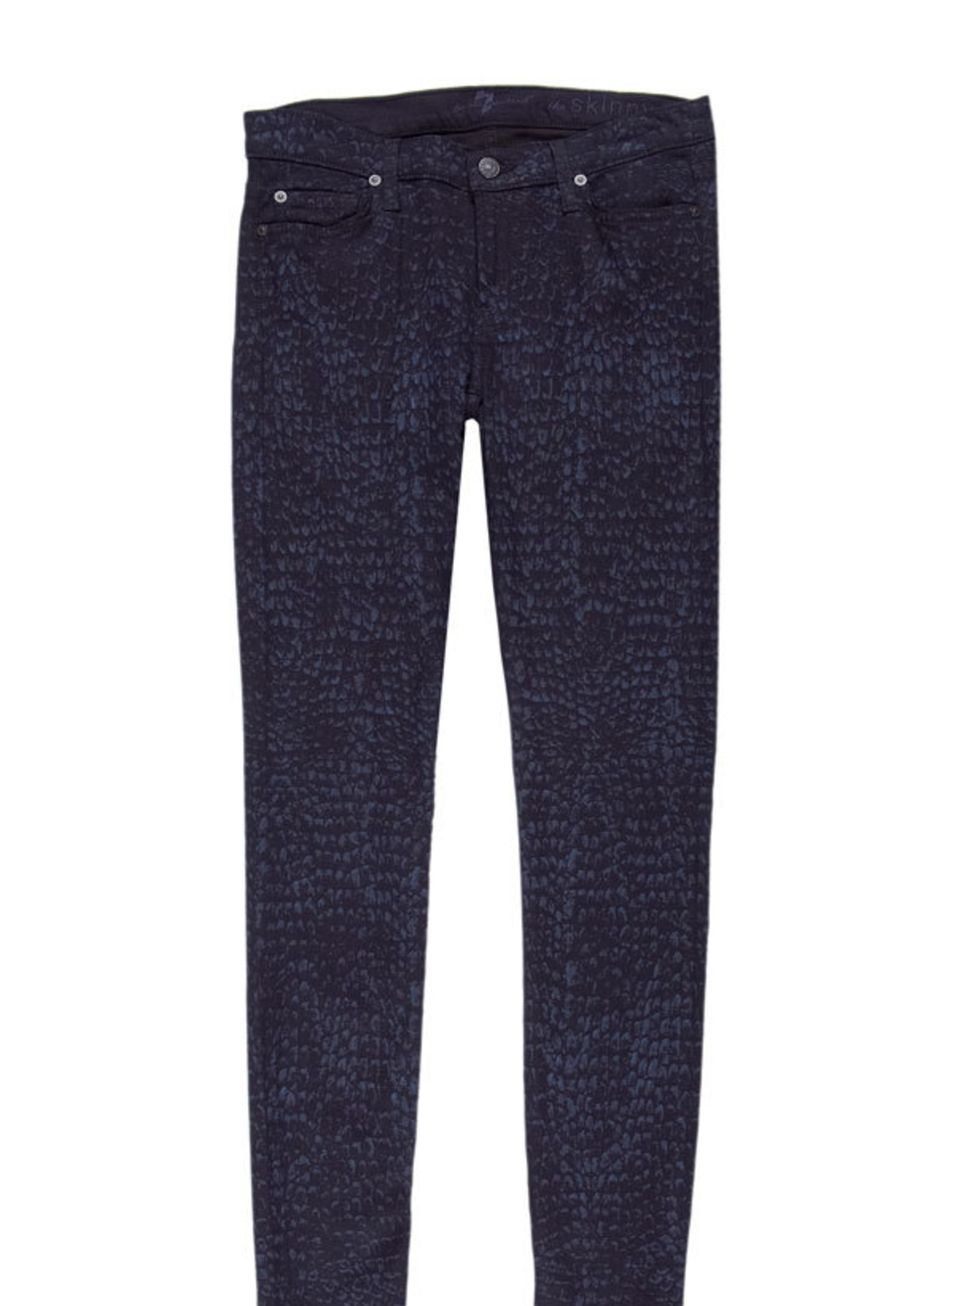 <p>7 For All Mankind printed jeans, £200, for stockists call 0207 734 8062</p>